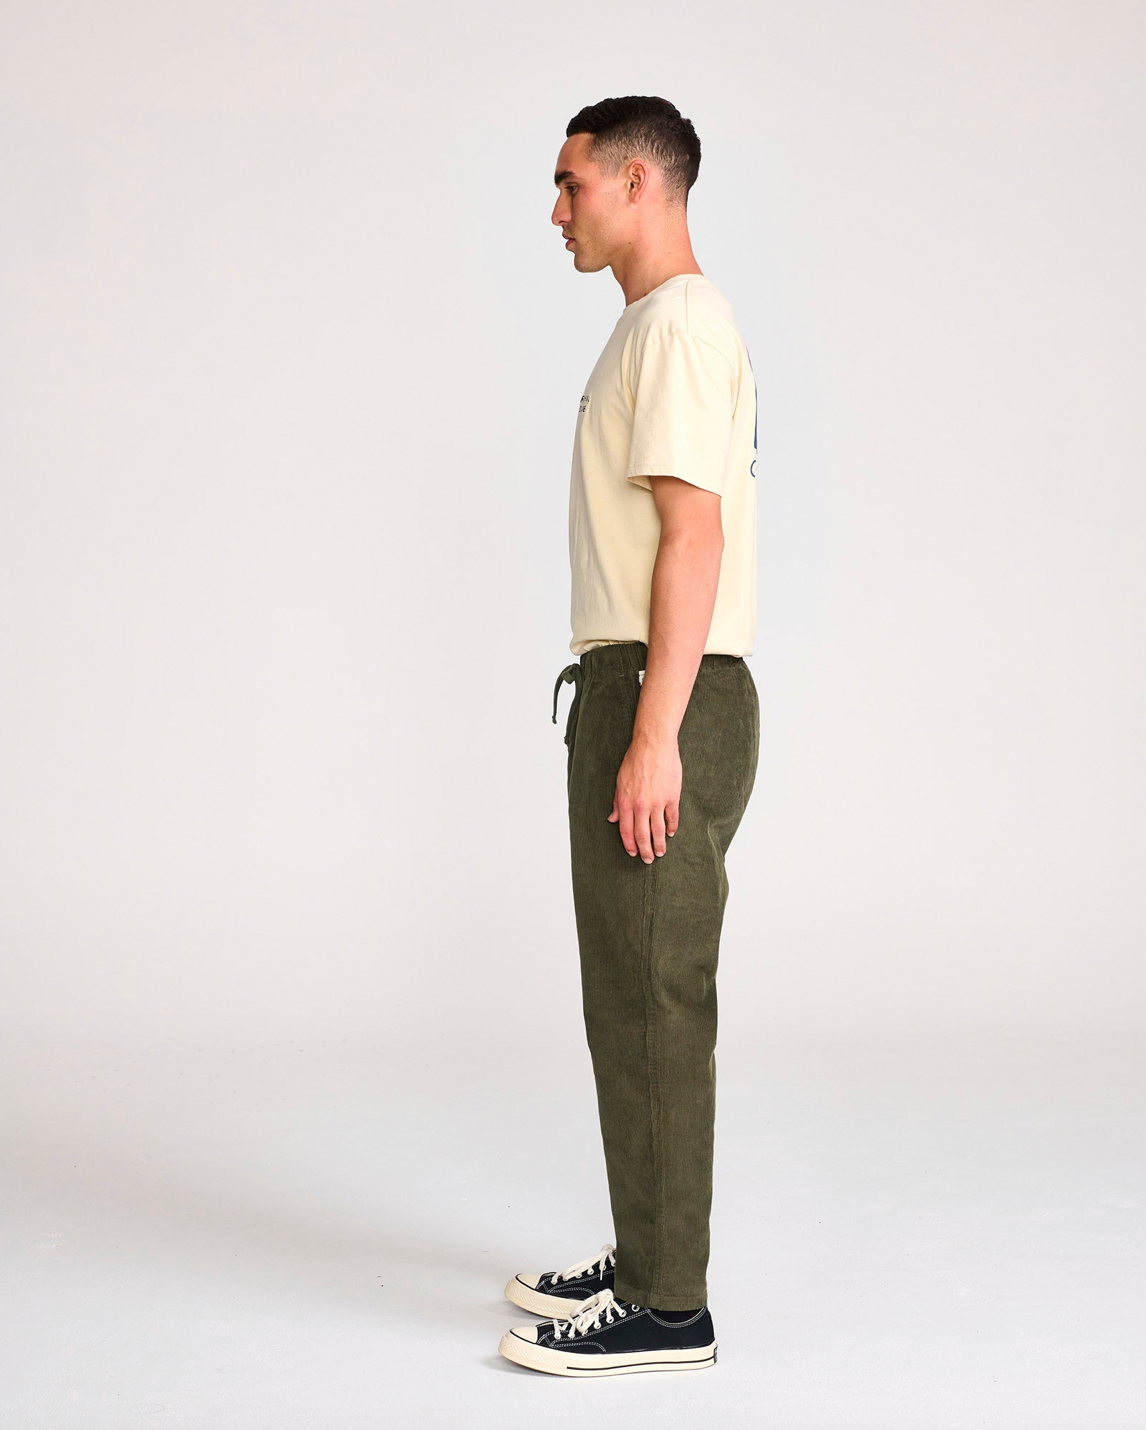 All Day Corduroy Pant - FATIGUE